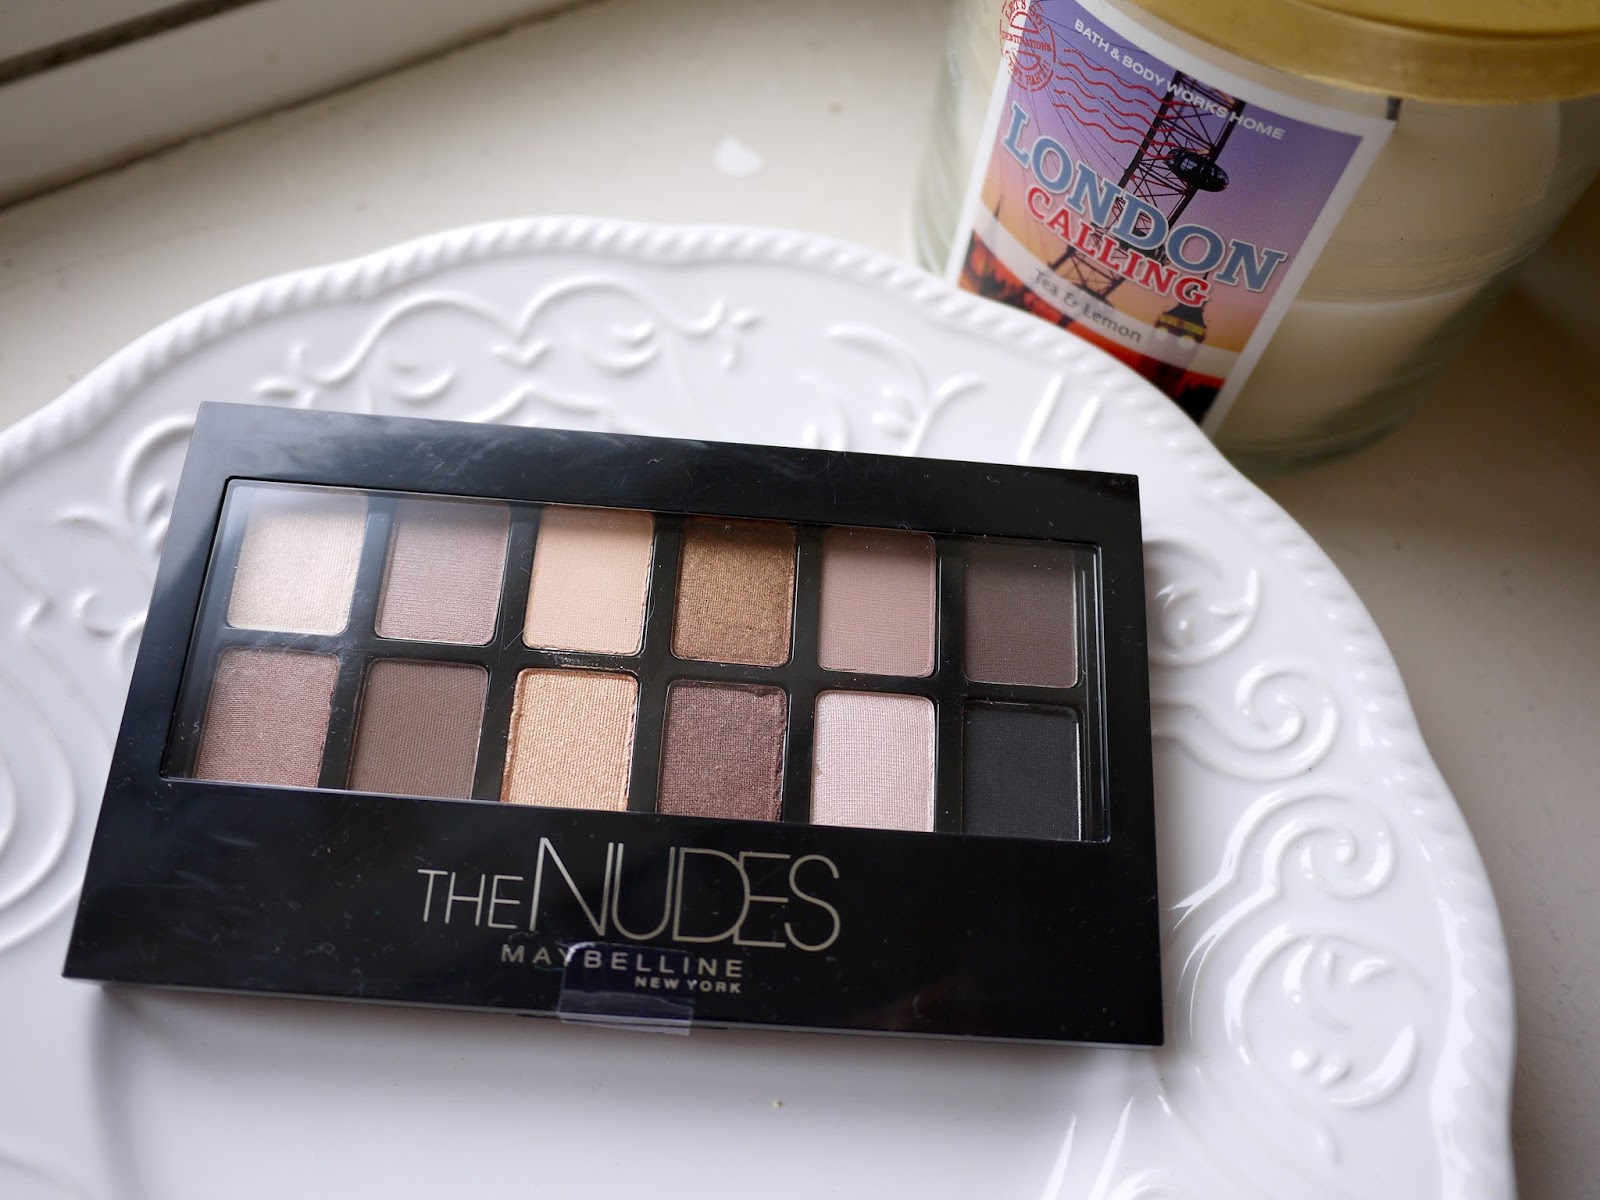 Maybelline The Nudes Palette Review